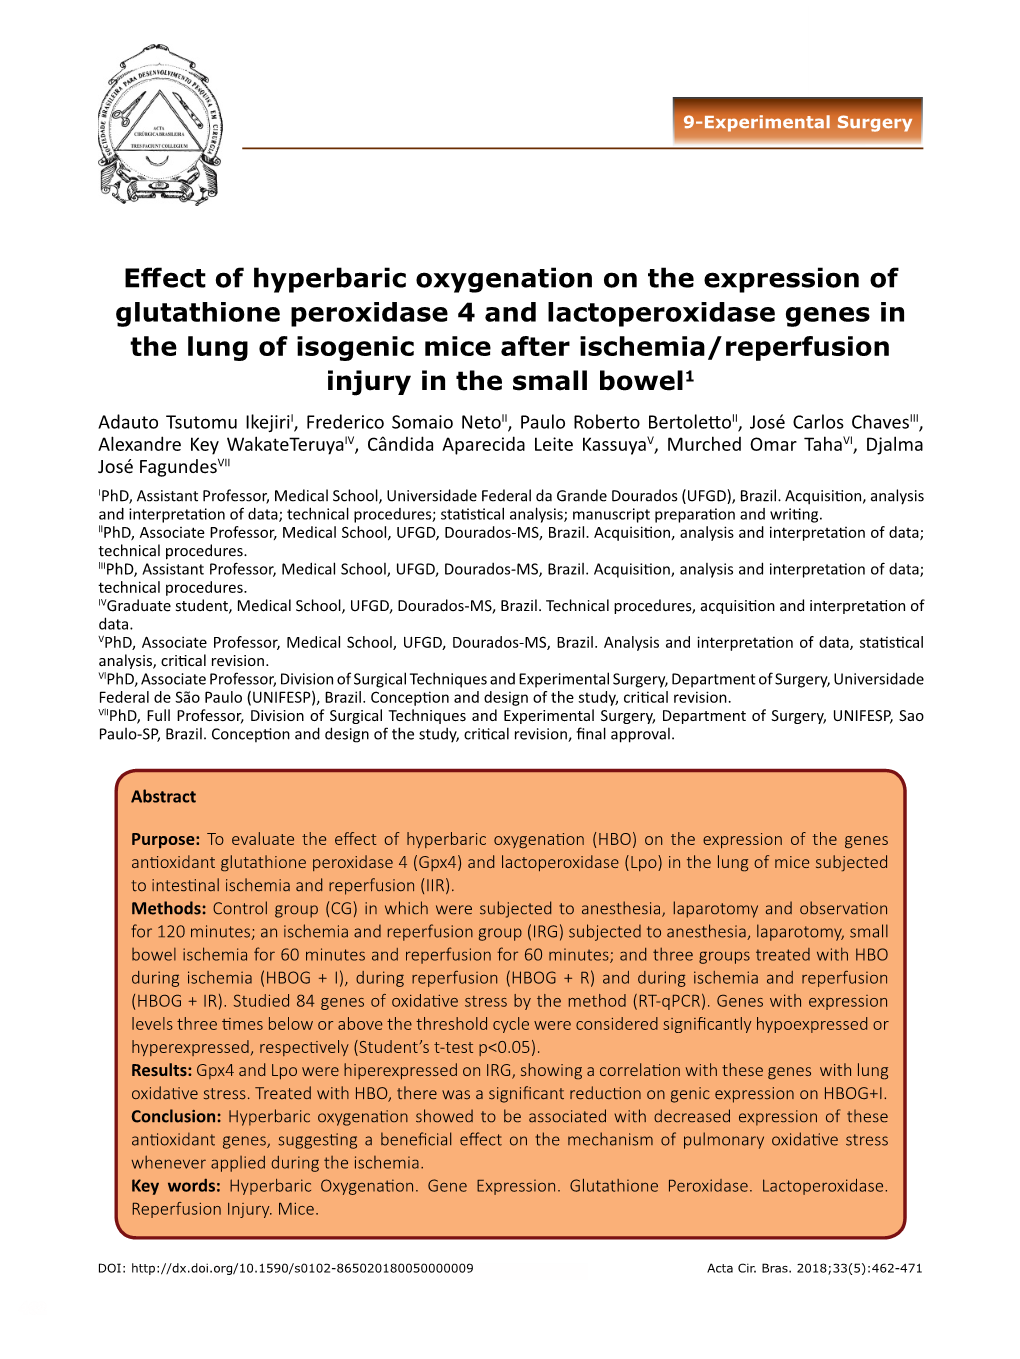 Effect of Hyperbaric Oxygenation on the Expression Of